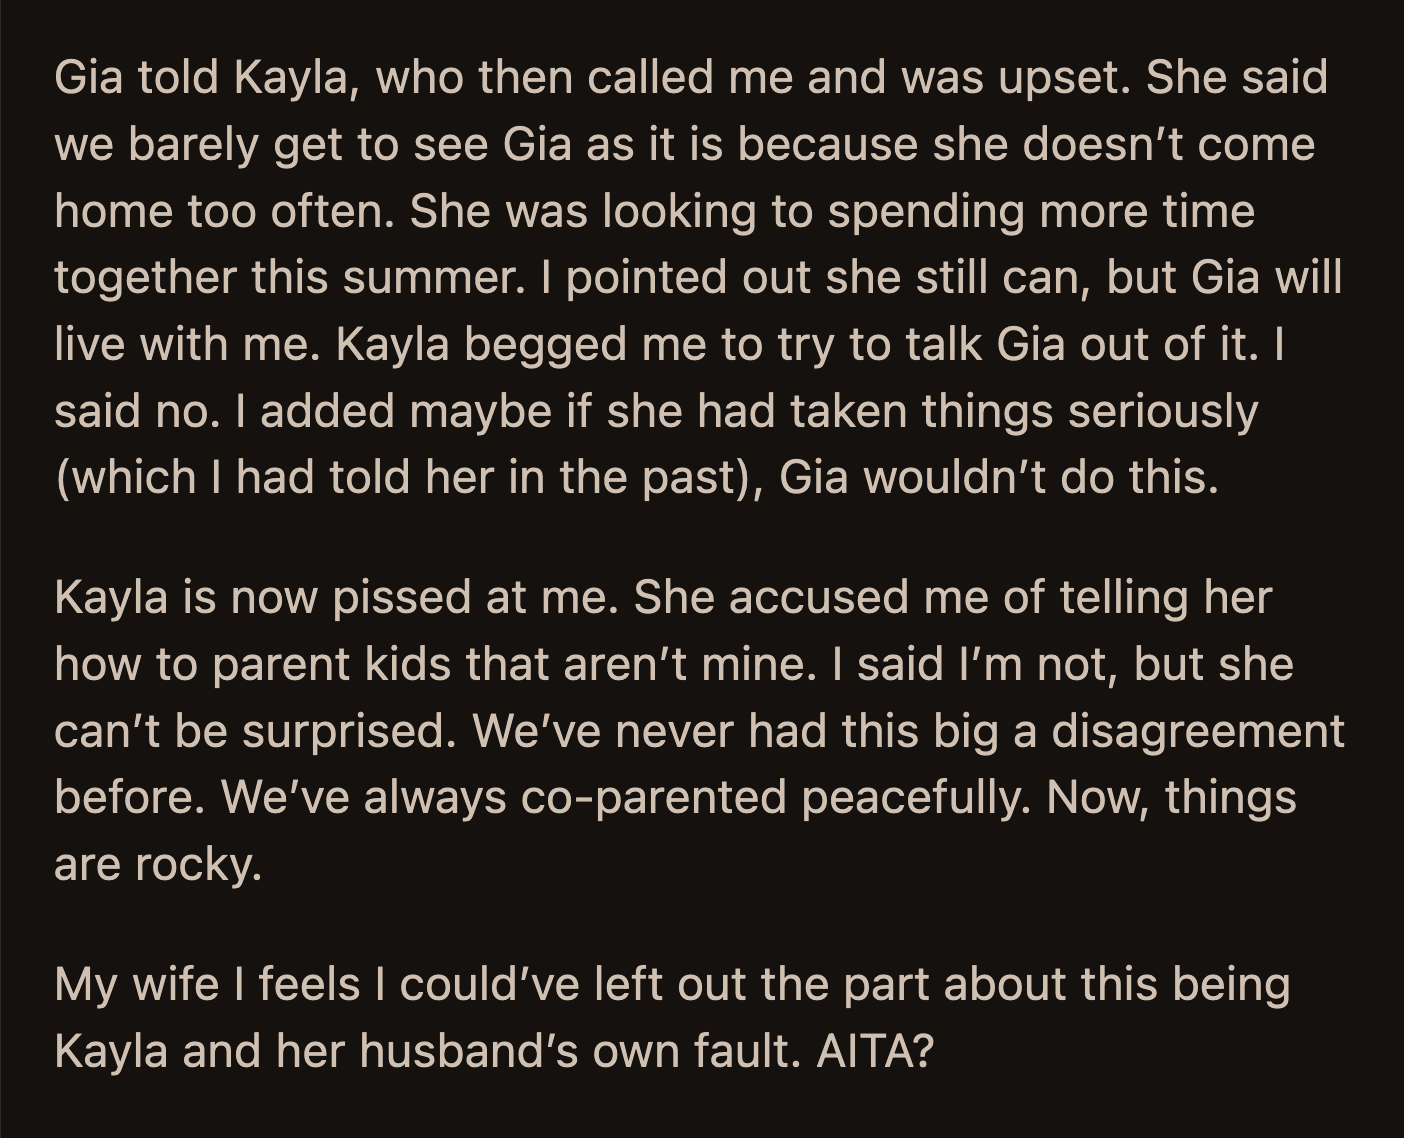 Kayla was told about Gia's decision. She called OP and begged him to convince Gia to move back. OP said it was their fault for not correcting her daughters' disrespect of Gia. This upset his ex-wife. She accused OP of trying to parent her kids.